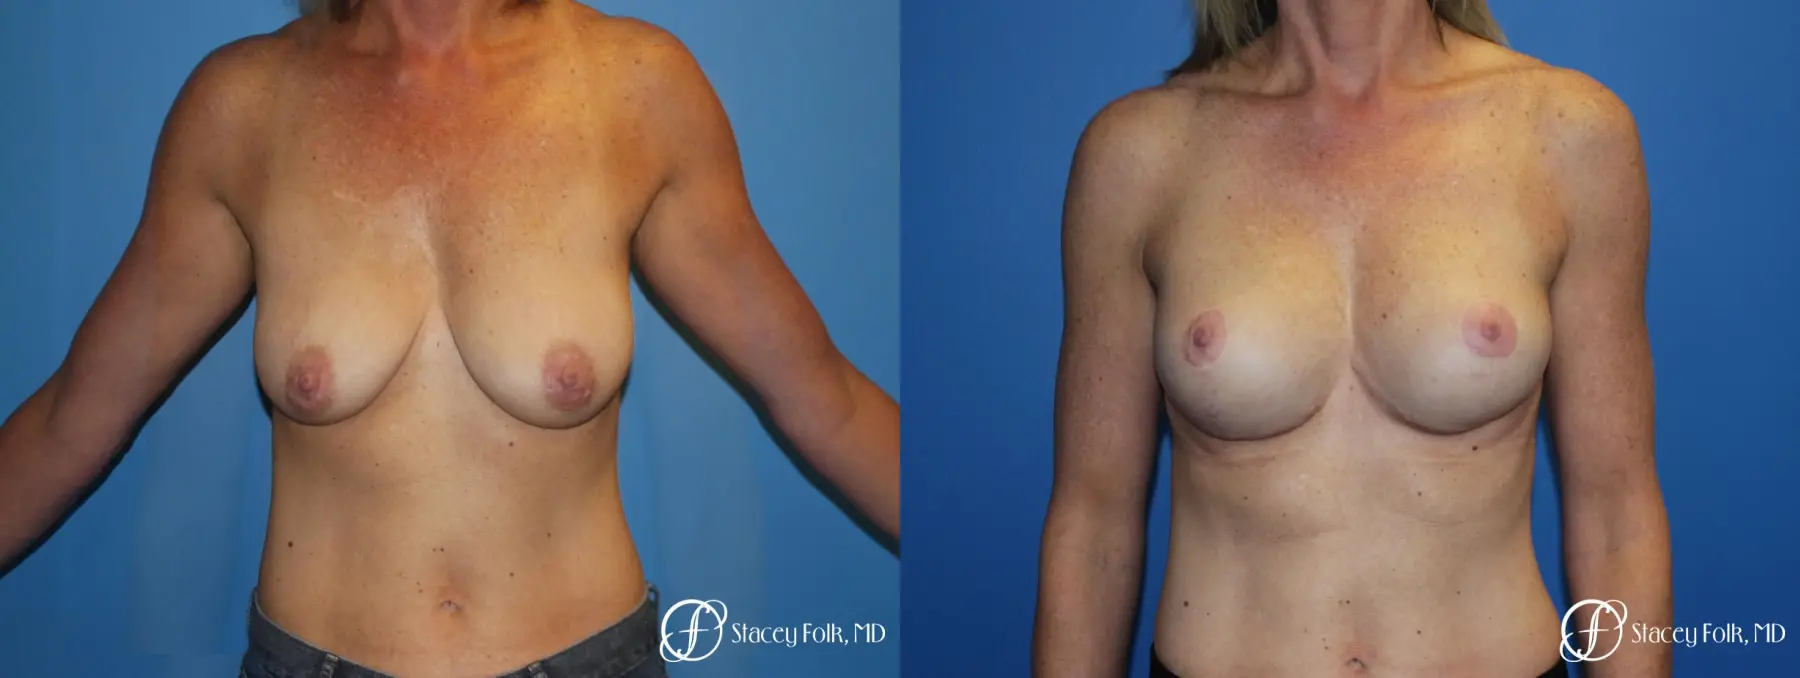 Breast Augmentation with Breast Lift (Augmentation/Mastopexy) - Before and After